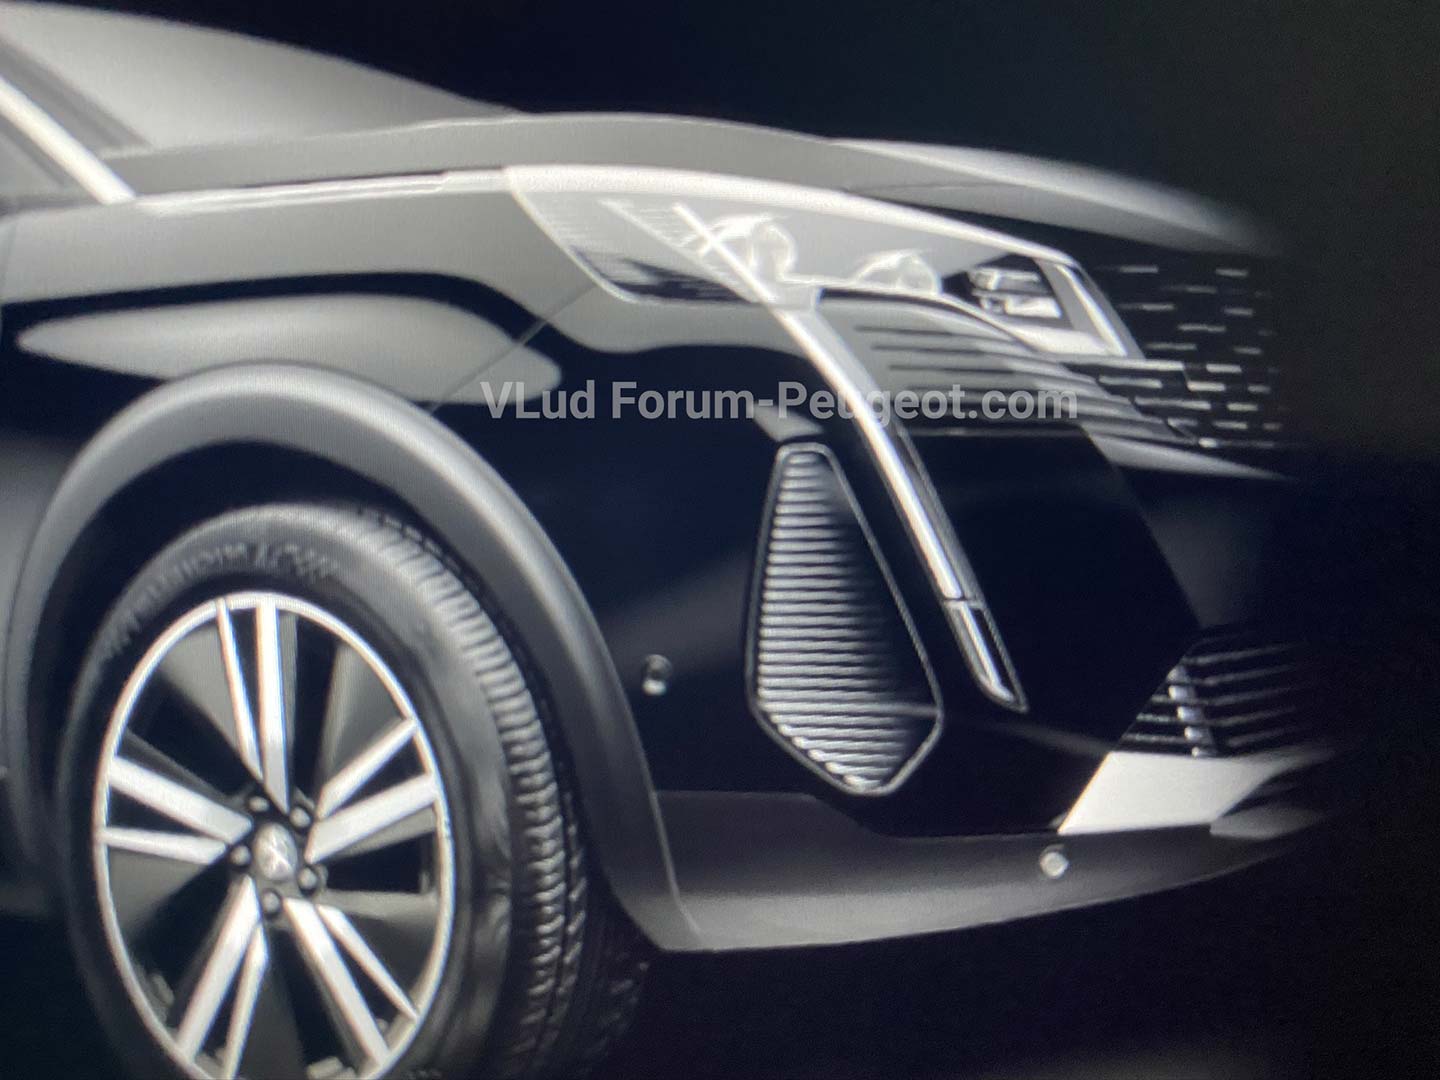 Nuevo Peugeot 3008 restyling (2020)